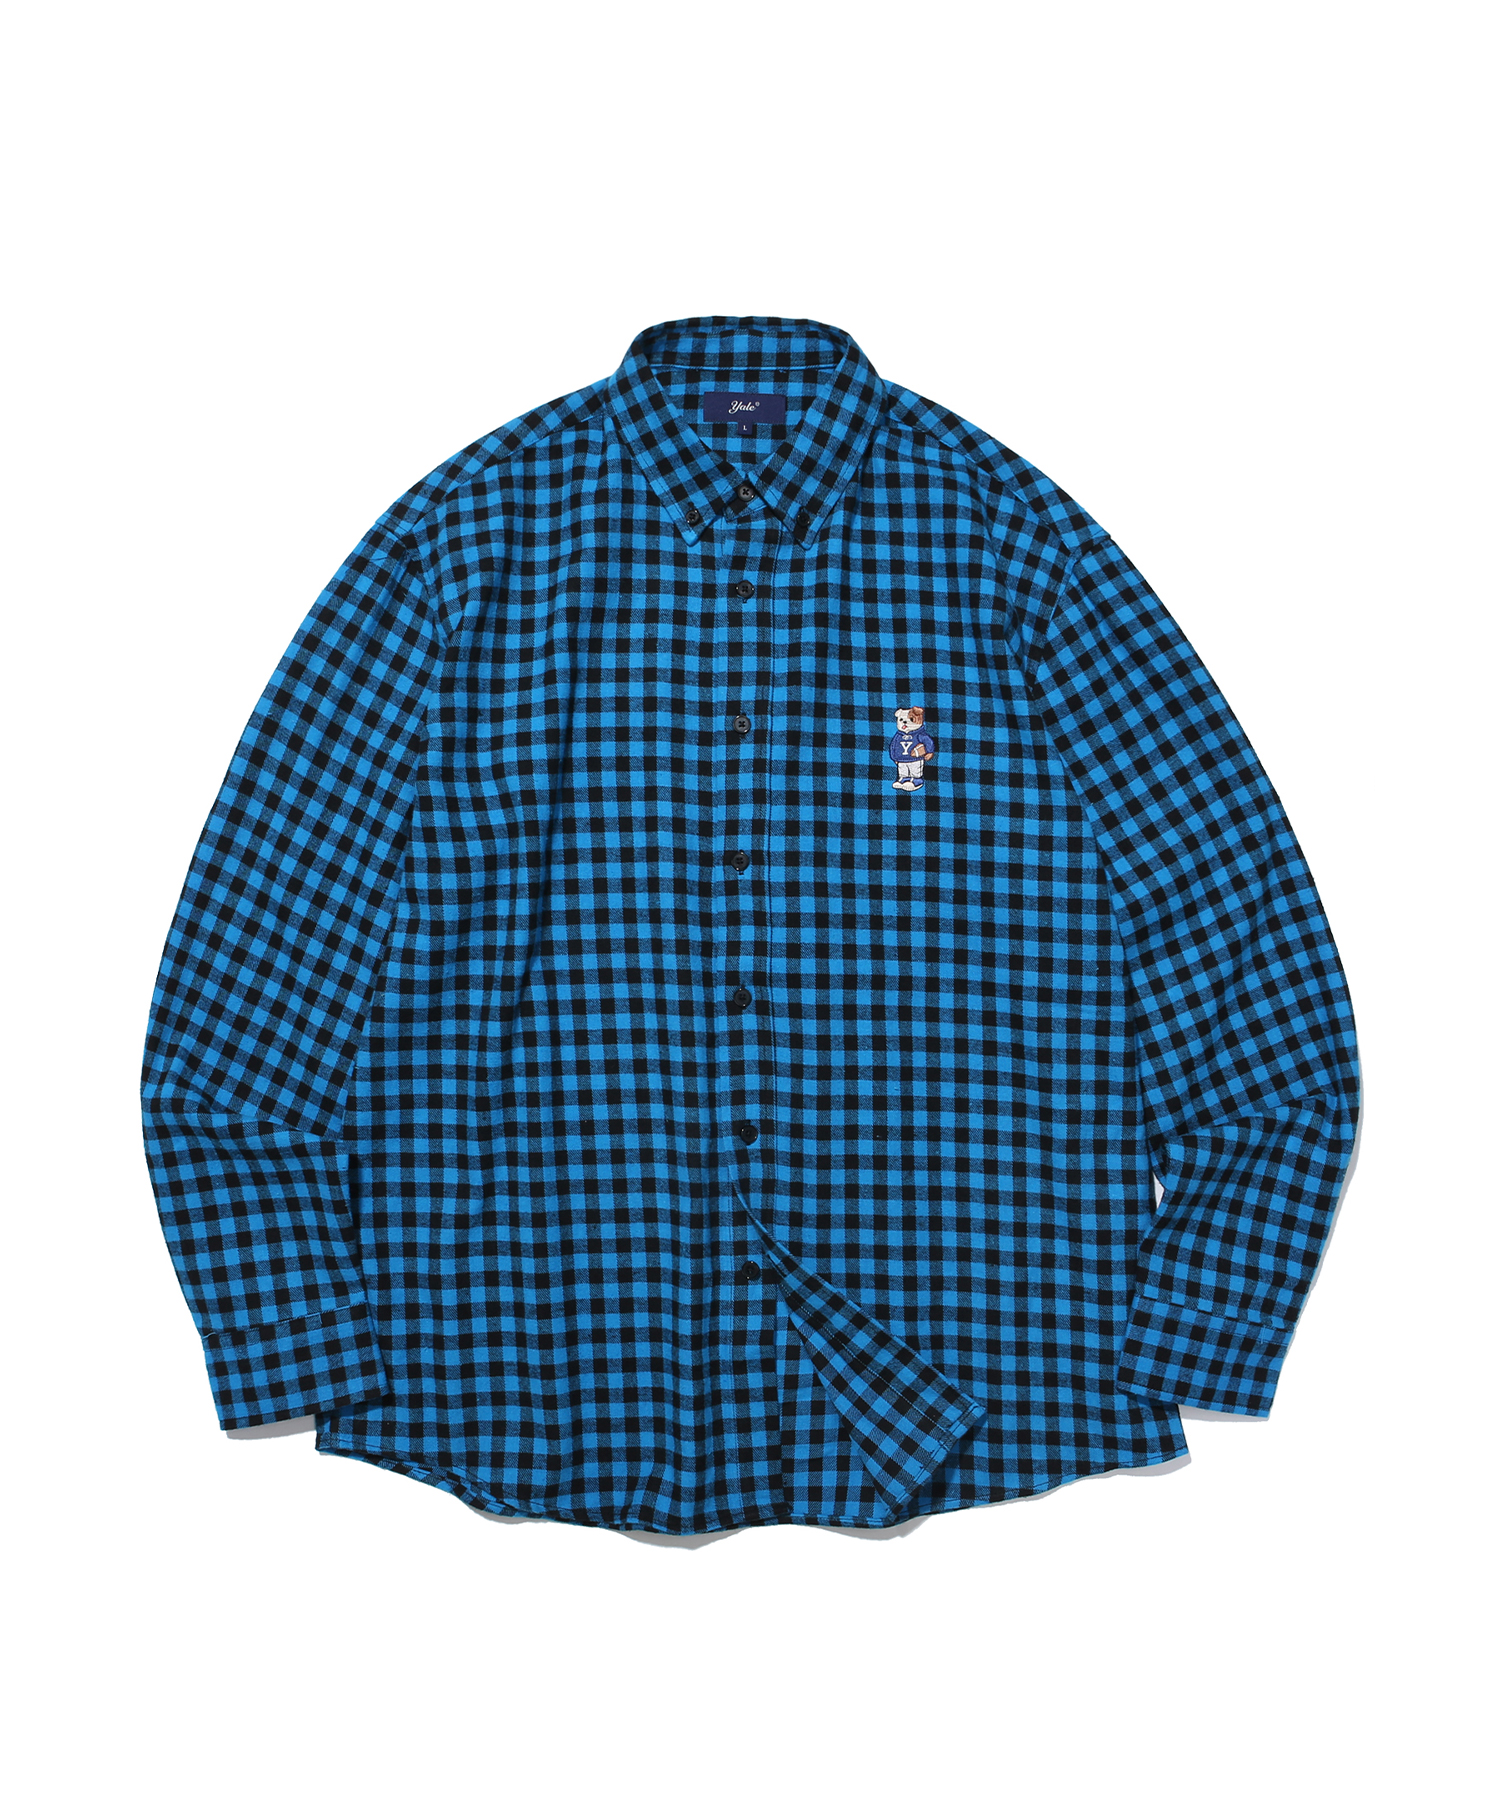 SMALL GINGHAM FLANNEL SHIRT BLUE